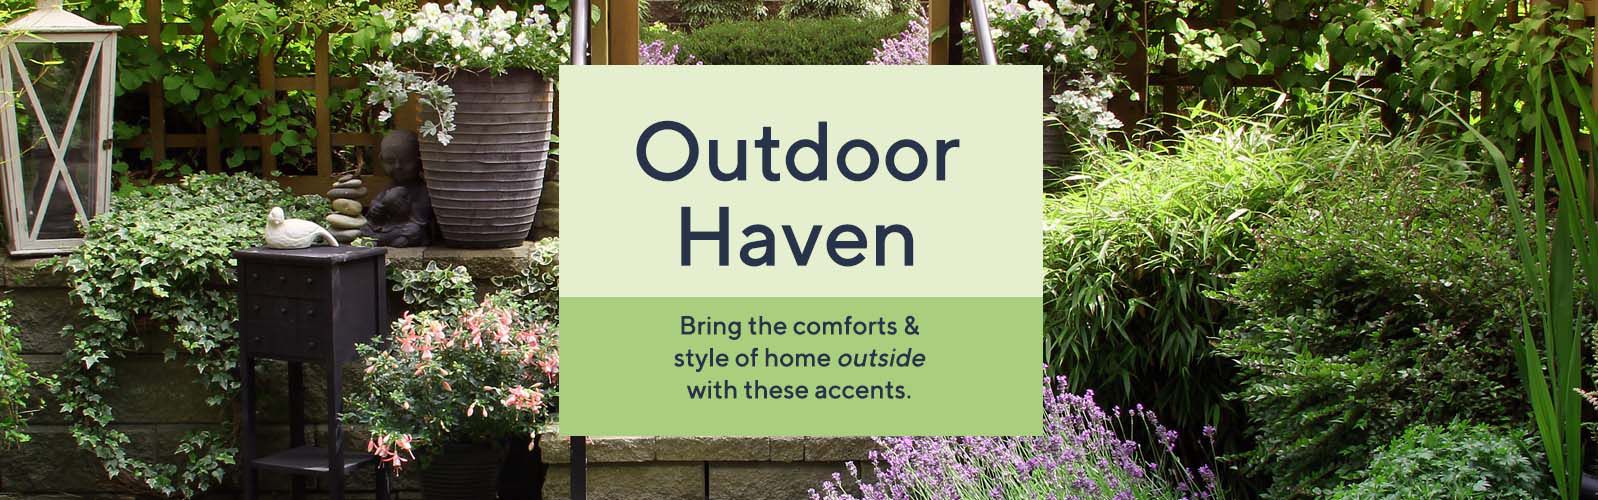 Outdoor Haven - Bring the comforts & style of home outside with these accents.